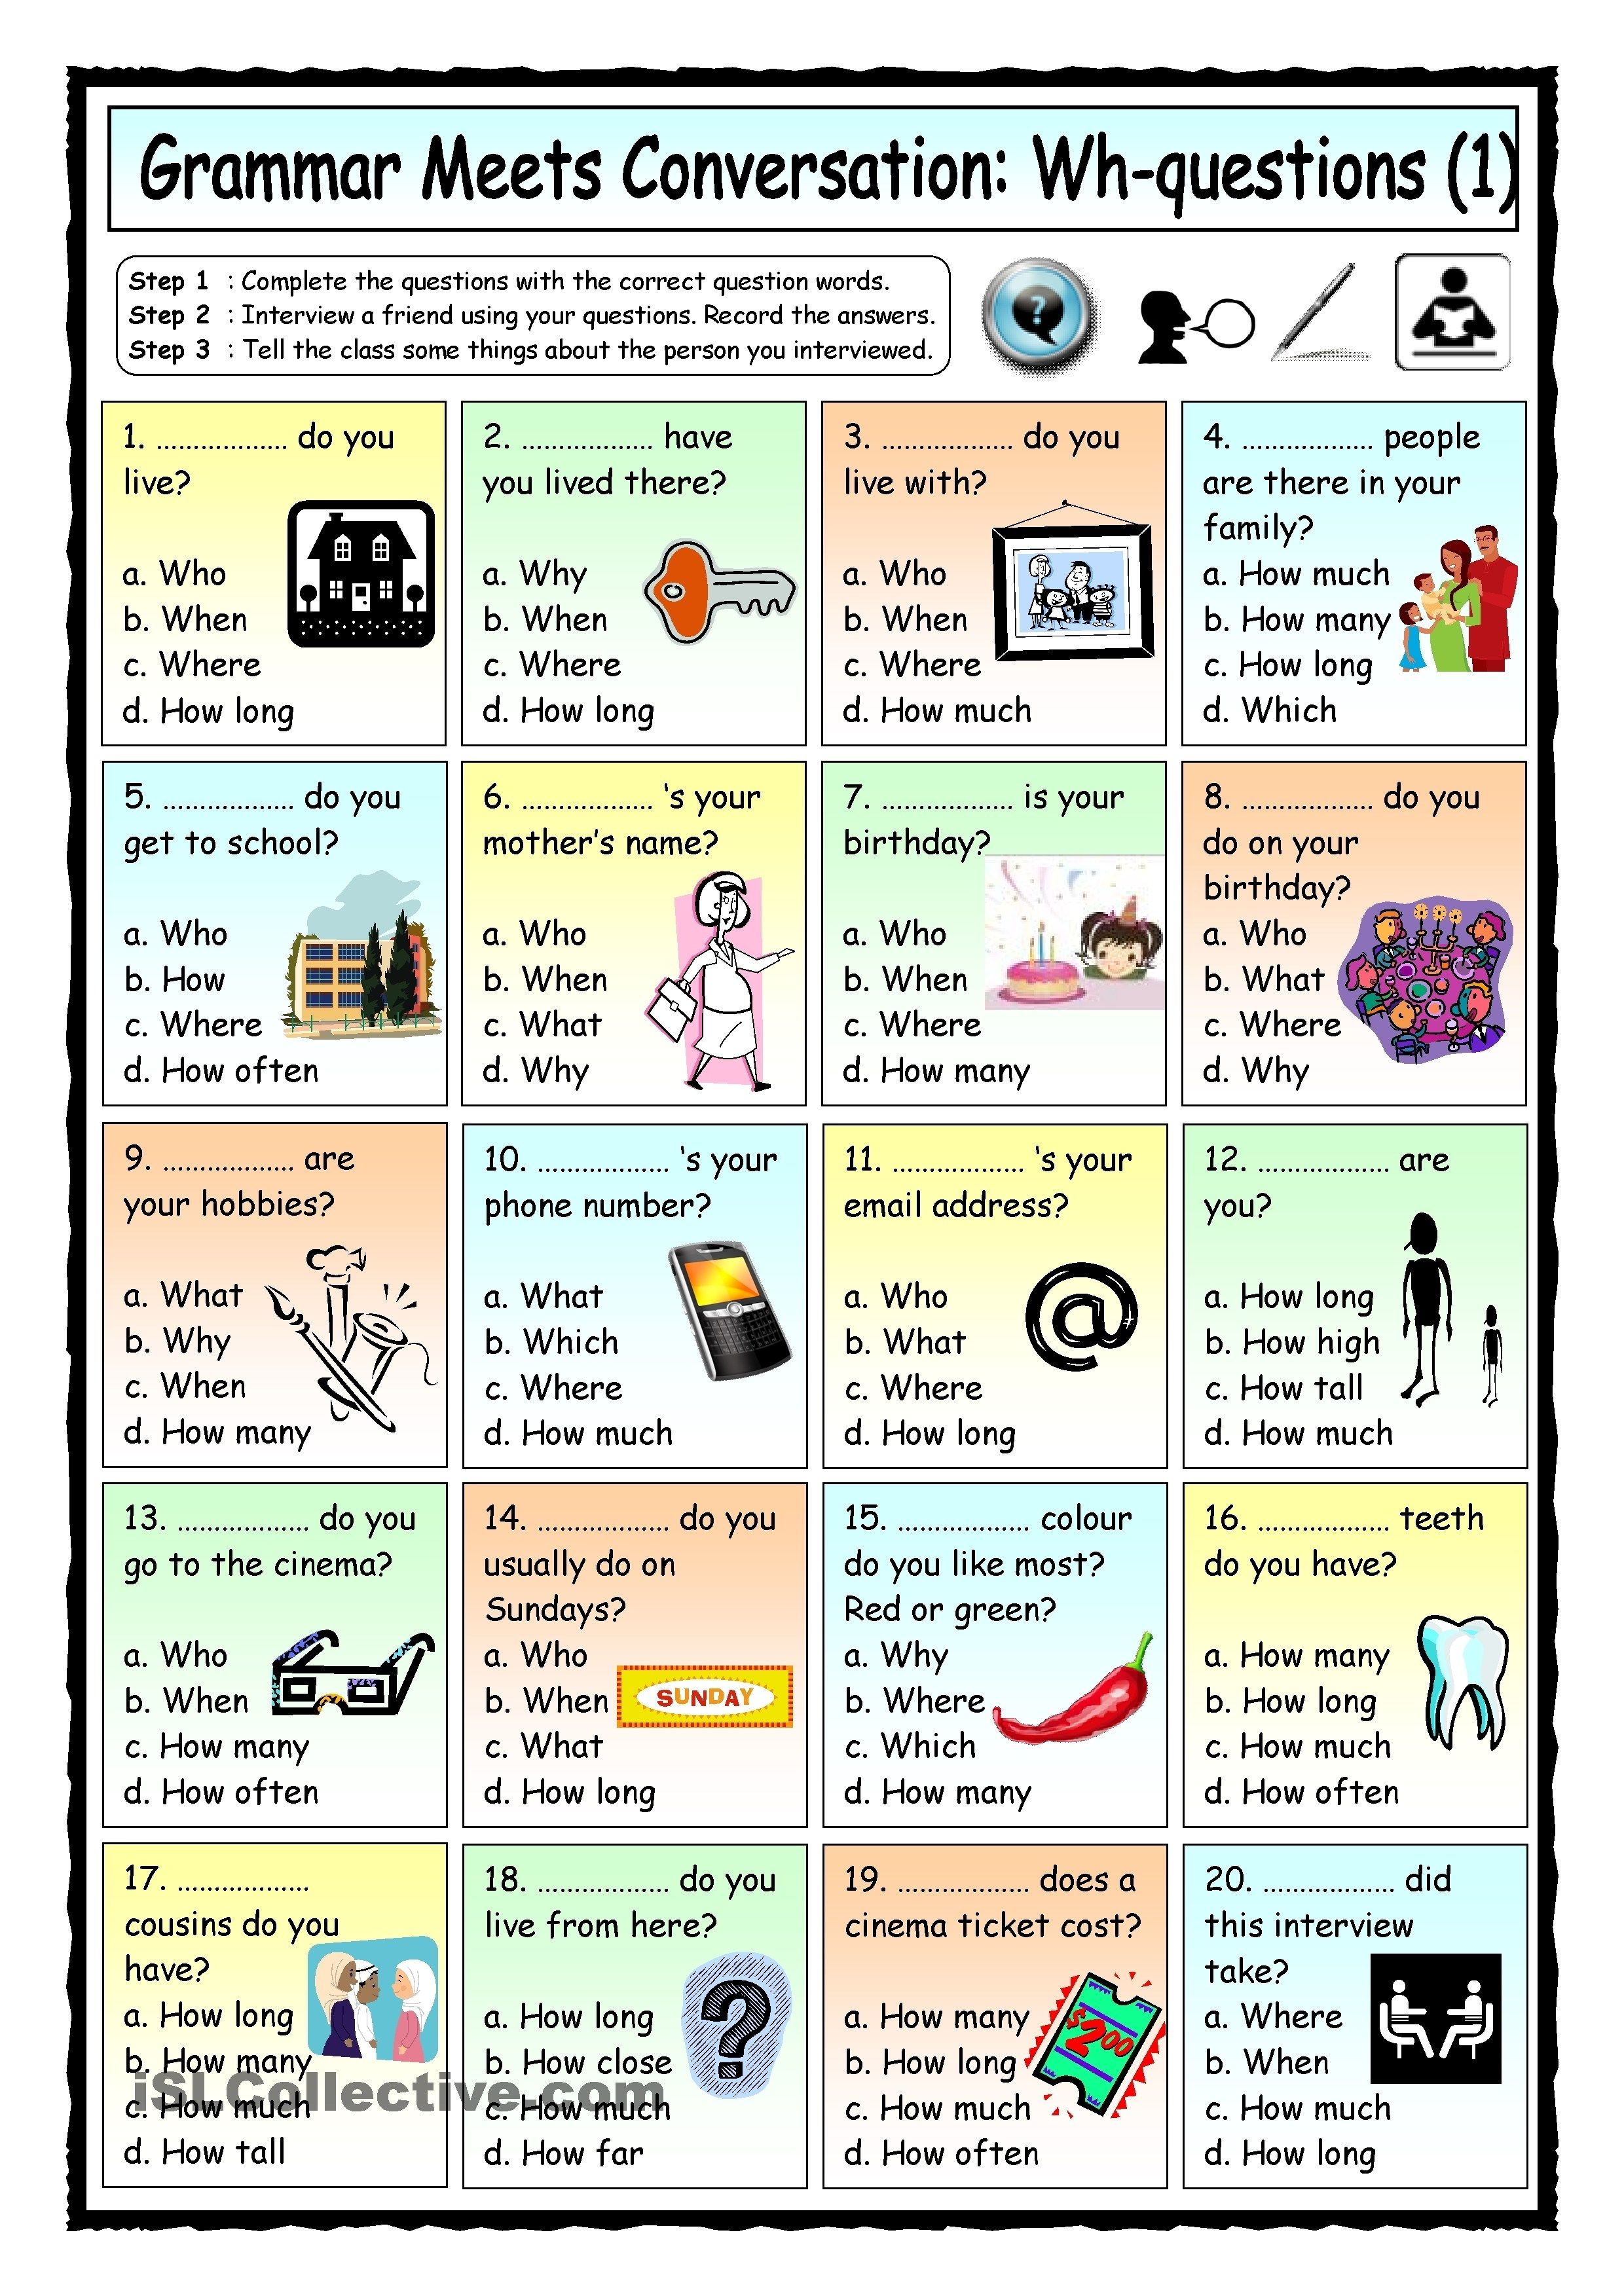 Grammar Meets Conversation: Wh-Questions (1) - Getting To Know You - Free Printable English Conversation Worksheets